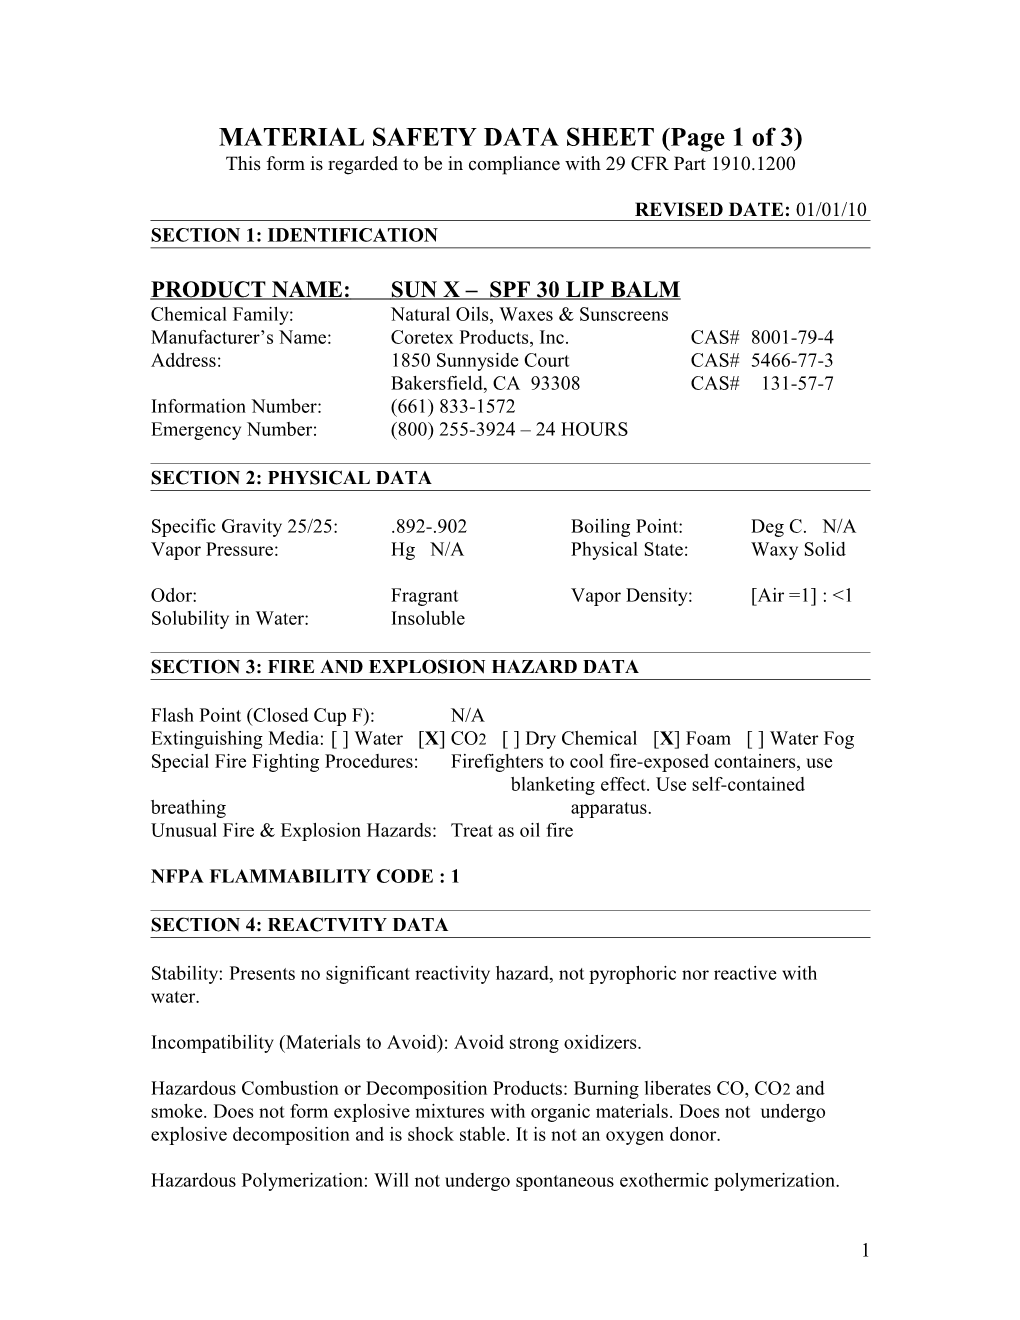 MATERIAL SAFETY DATA SHEET (Page 1 Of 3)